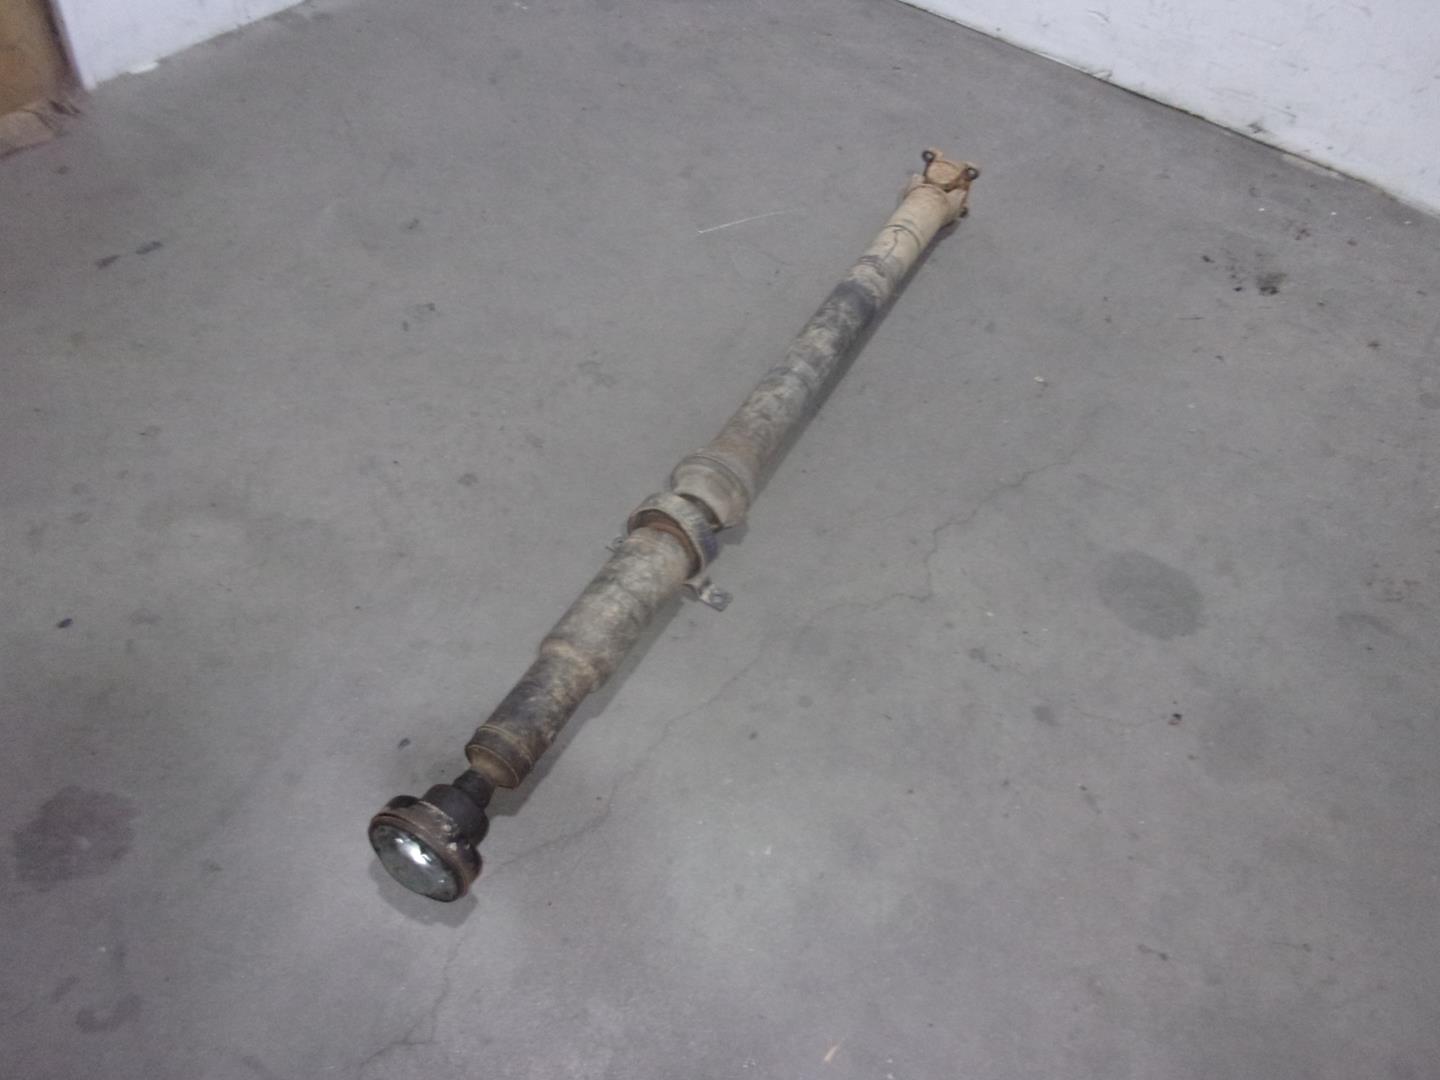 LAND ROVER Discovery 3 generation (2004-2009) Gearbox Short Propshaft TVB500360, TRASERA, BURRA3B 24218208